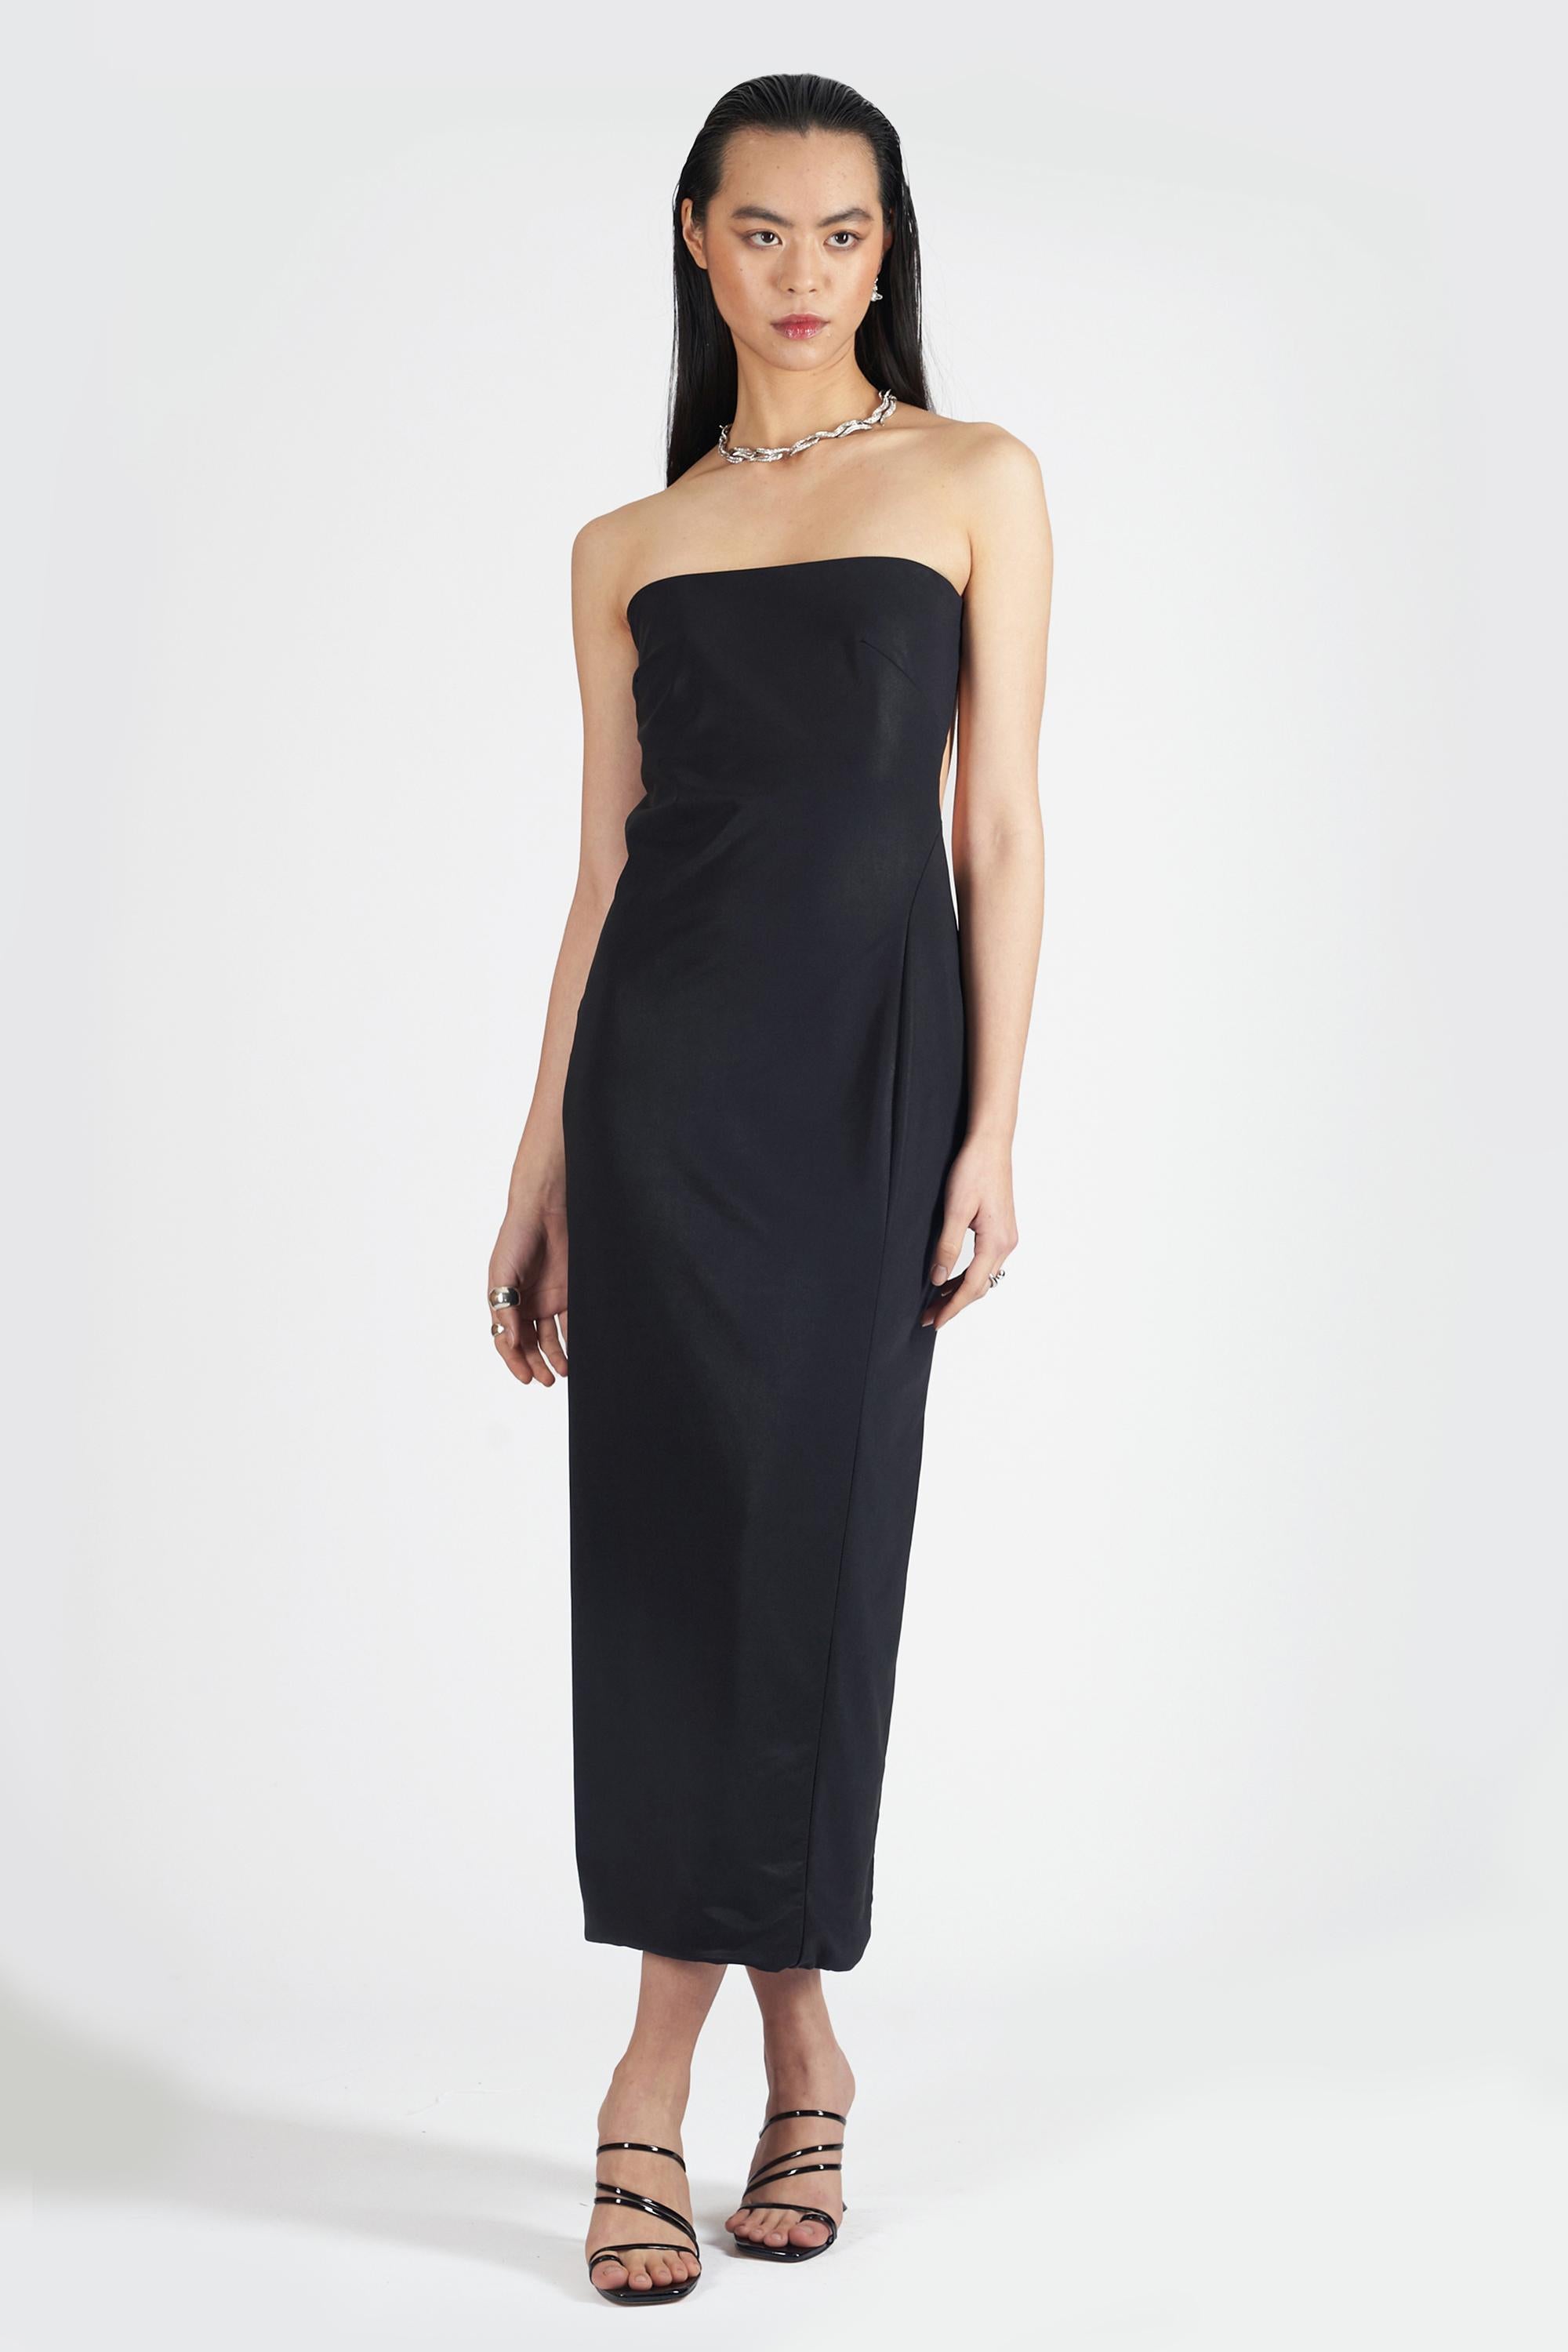 Versace Vintage 1991 Strapless Cutout Dress In Excellent Condition For Sale In London, GB